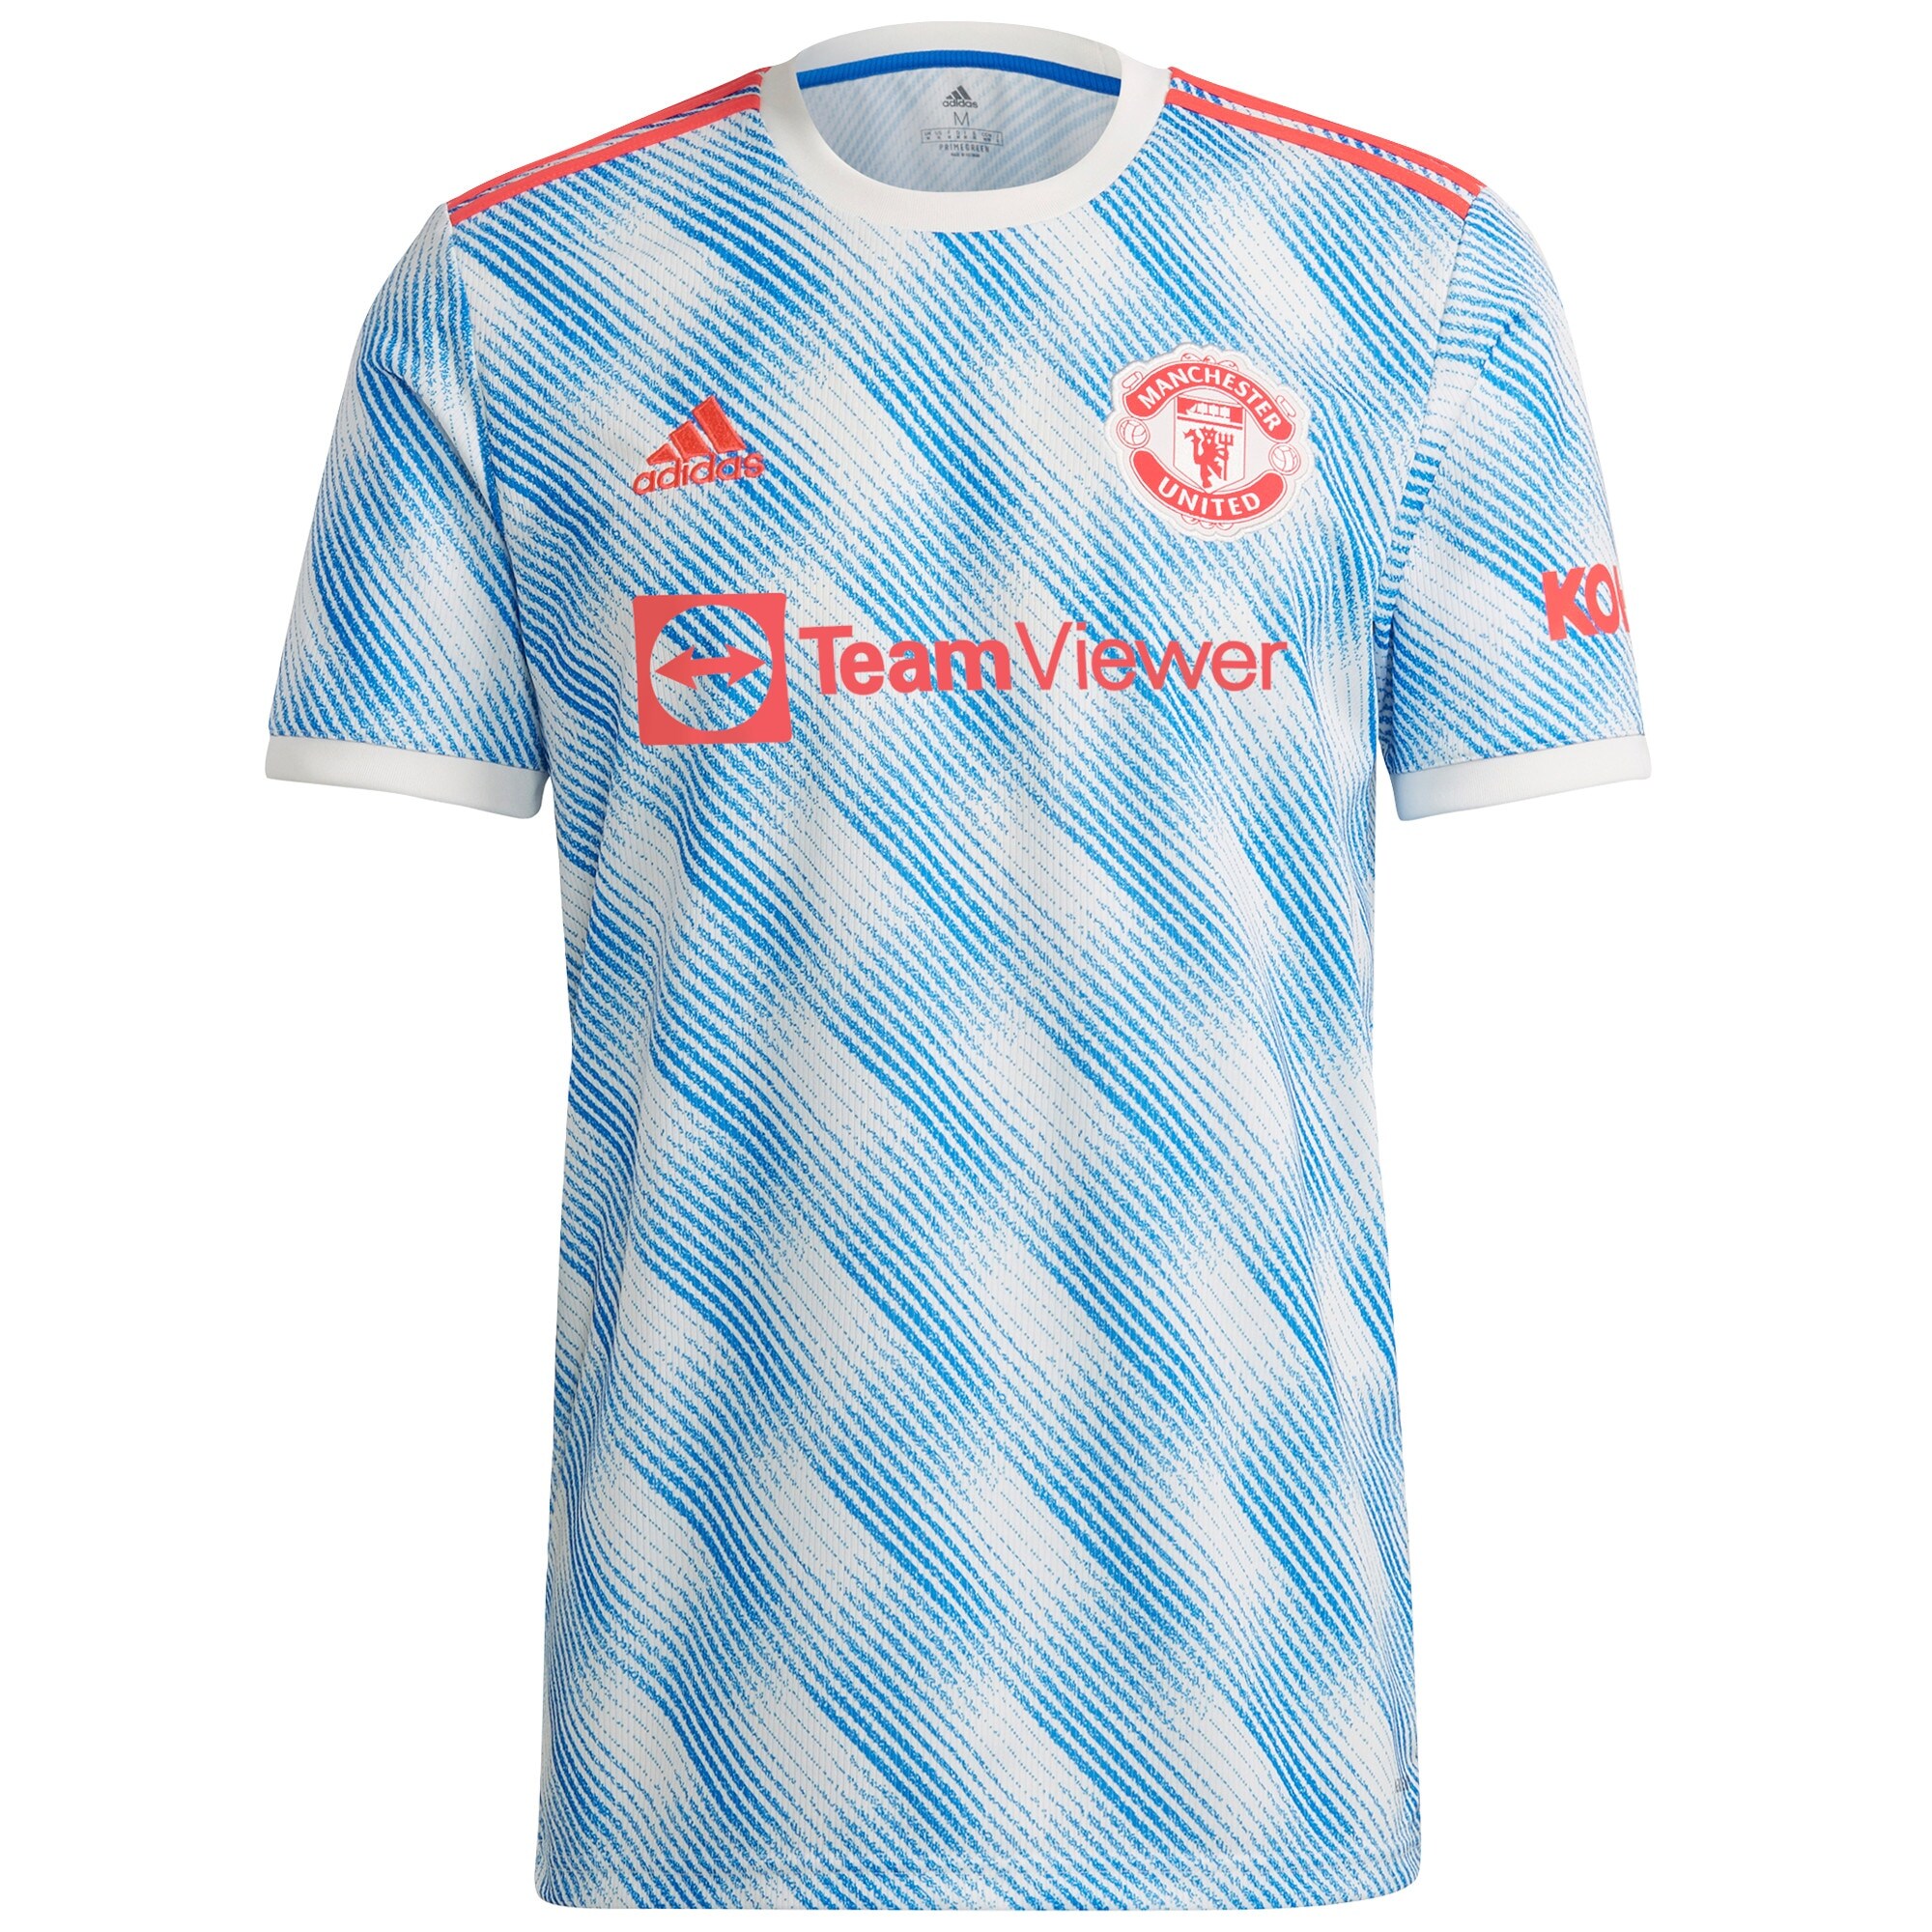 Manchester United Cup Away Shirt 2021-22 with Mannion 5 printing